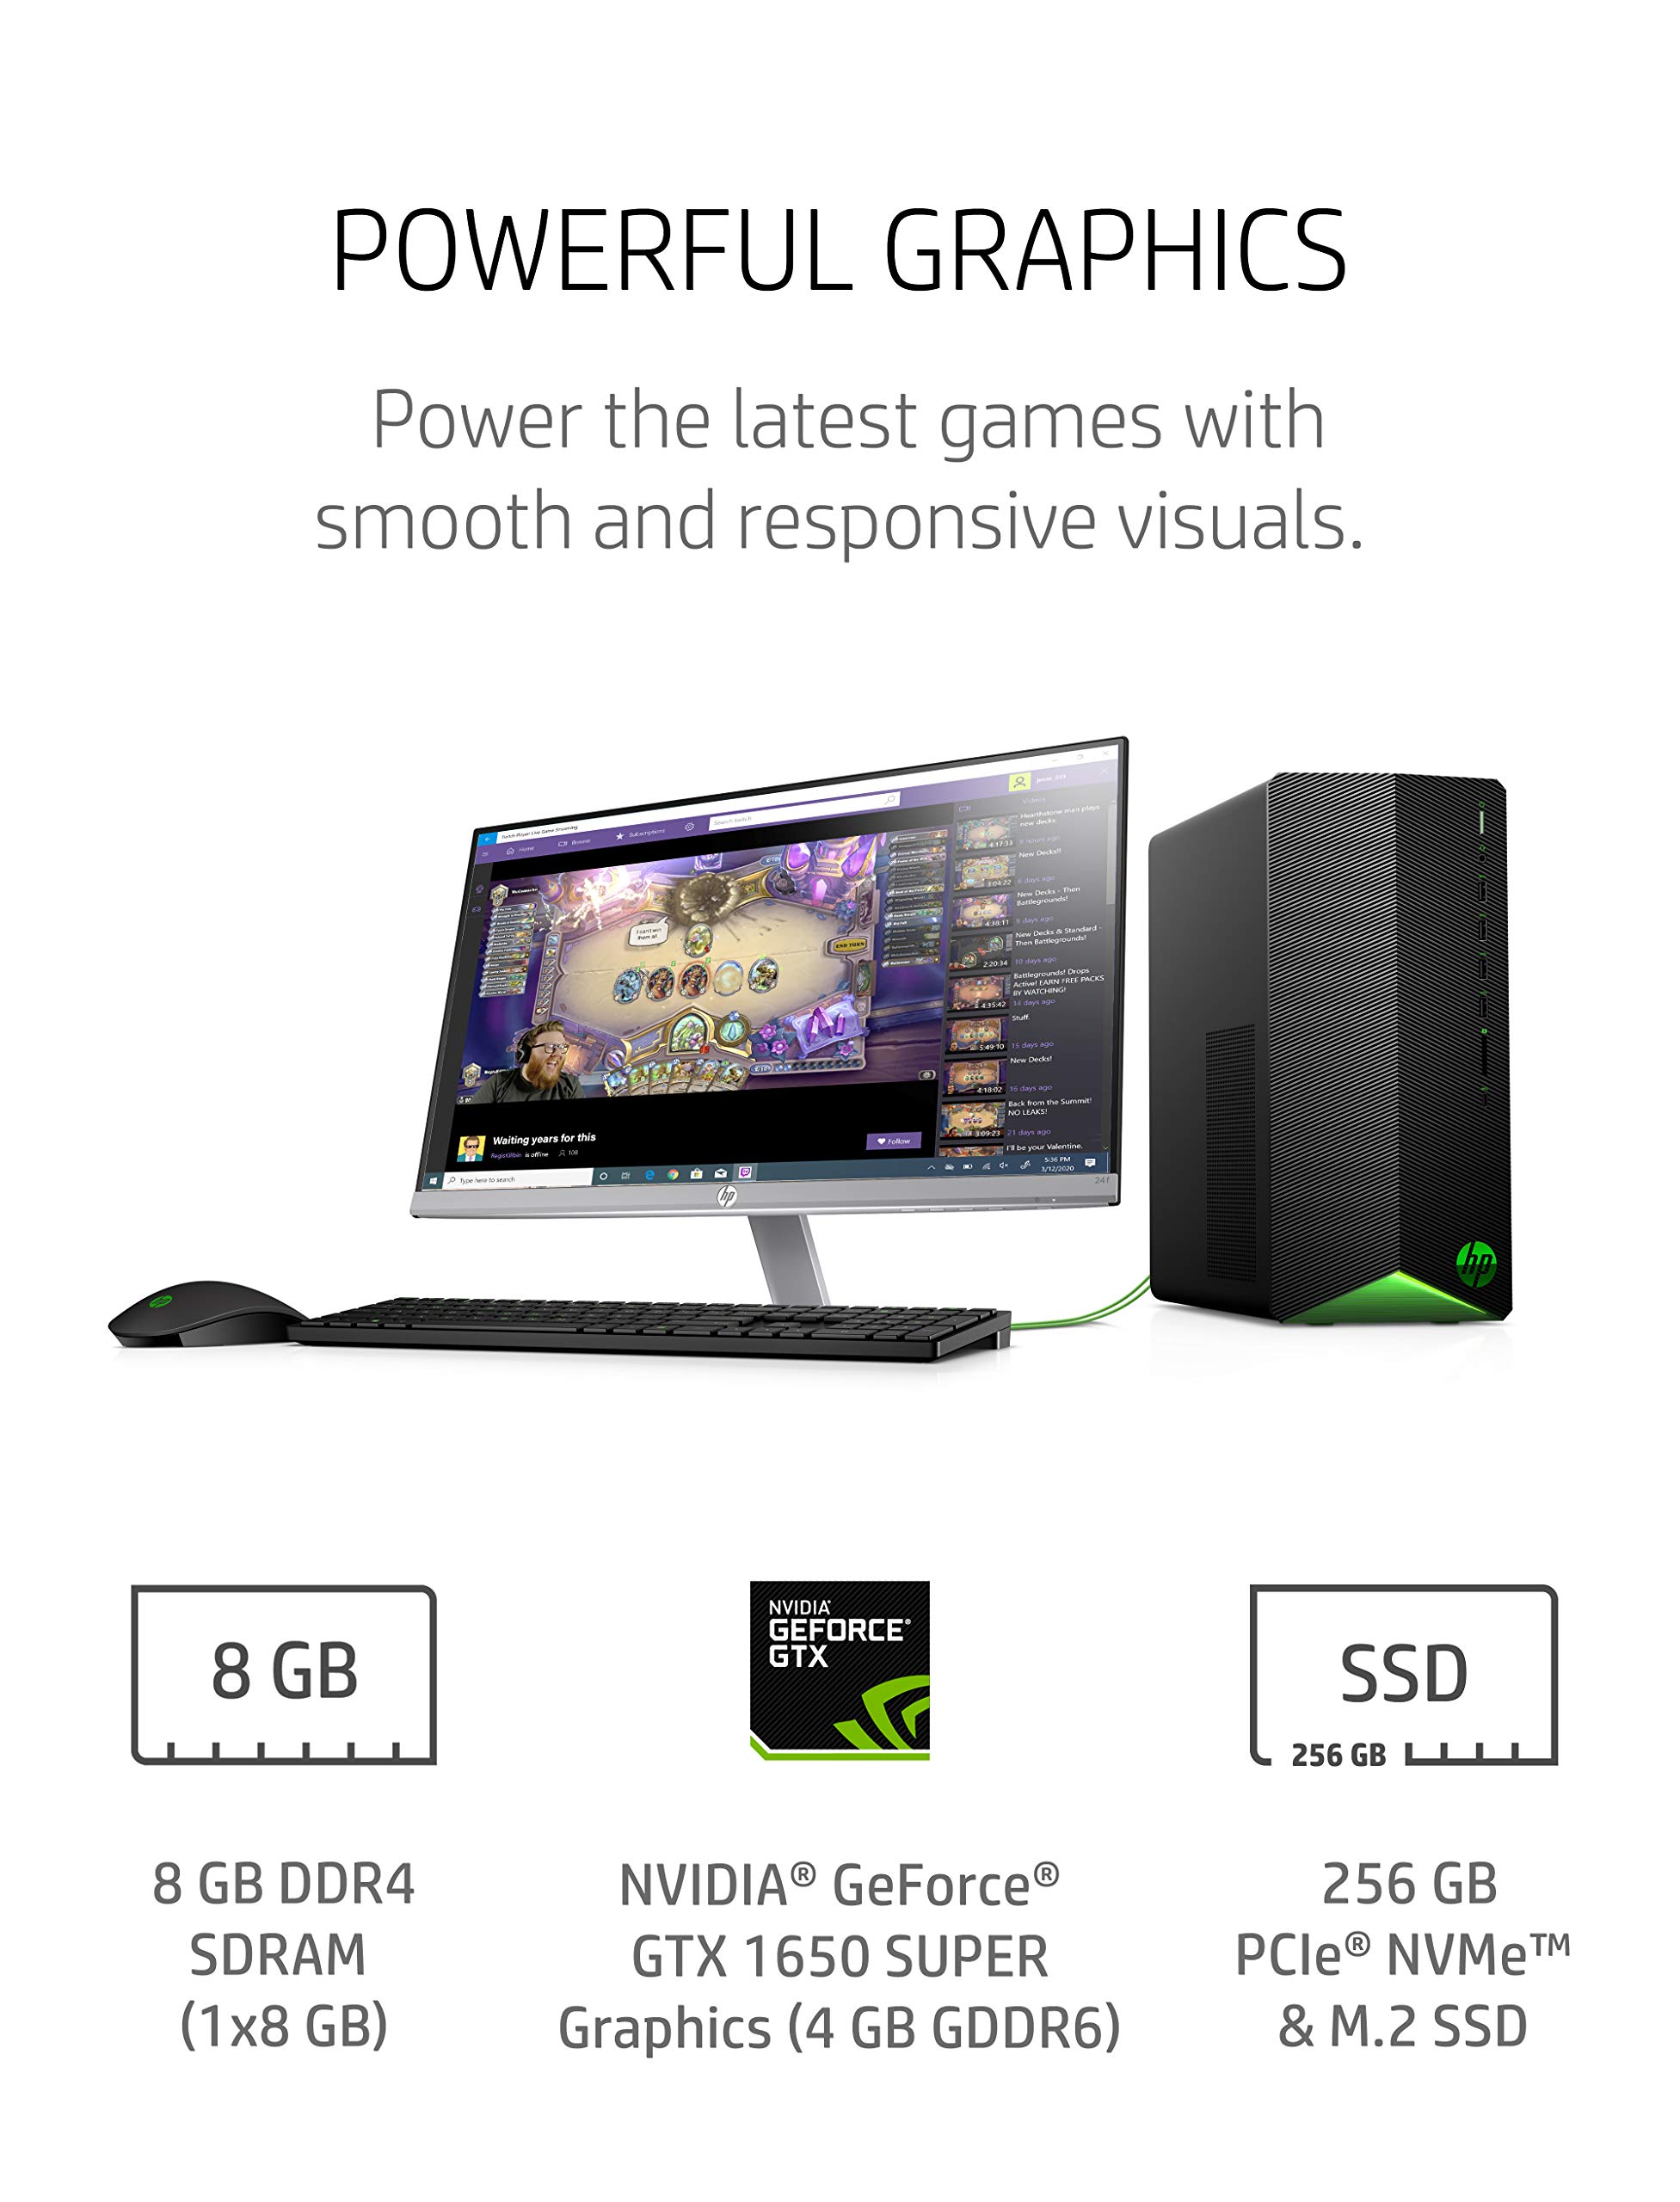 HP Pavilion Gaming Desktop, NVIDIA GeForce GTX 1650 SUPER, Intel Core i3-10100, 8 GB DDR4 RAM, 256 GB PCIe NVMe SSD, Windows 11, USB Mouse and Keyboard, Compact Tower Design (TG01-1022, 2020)